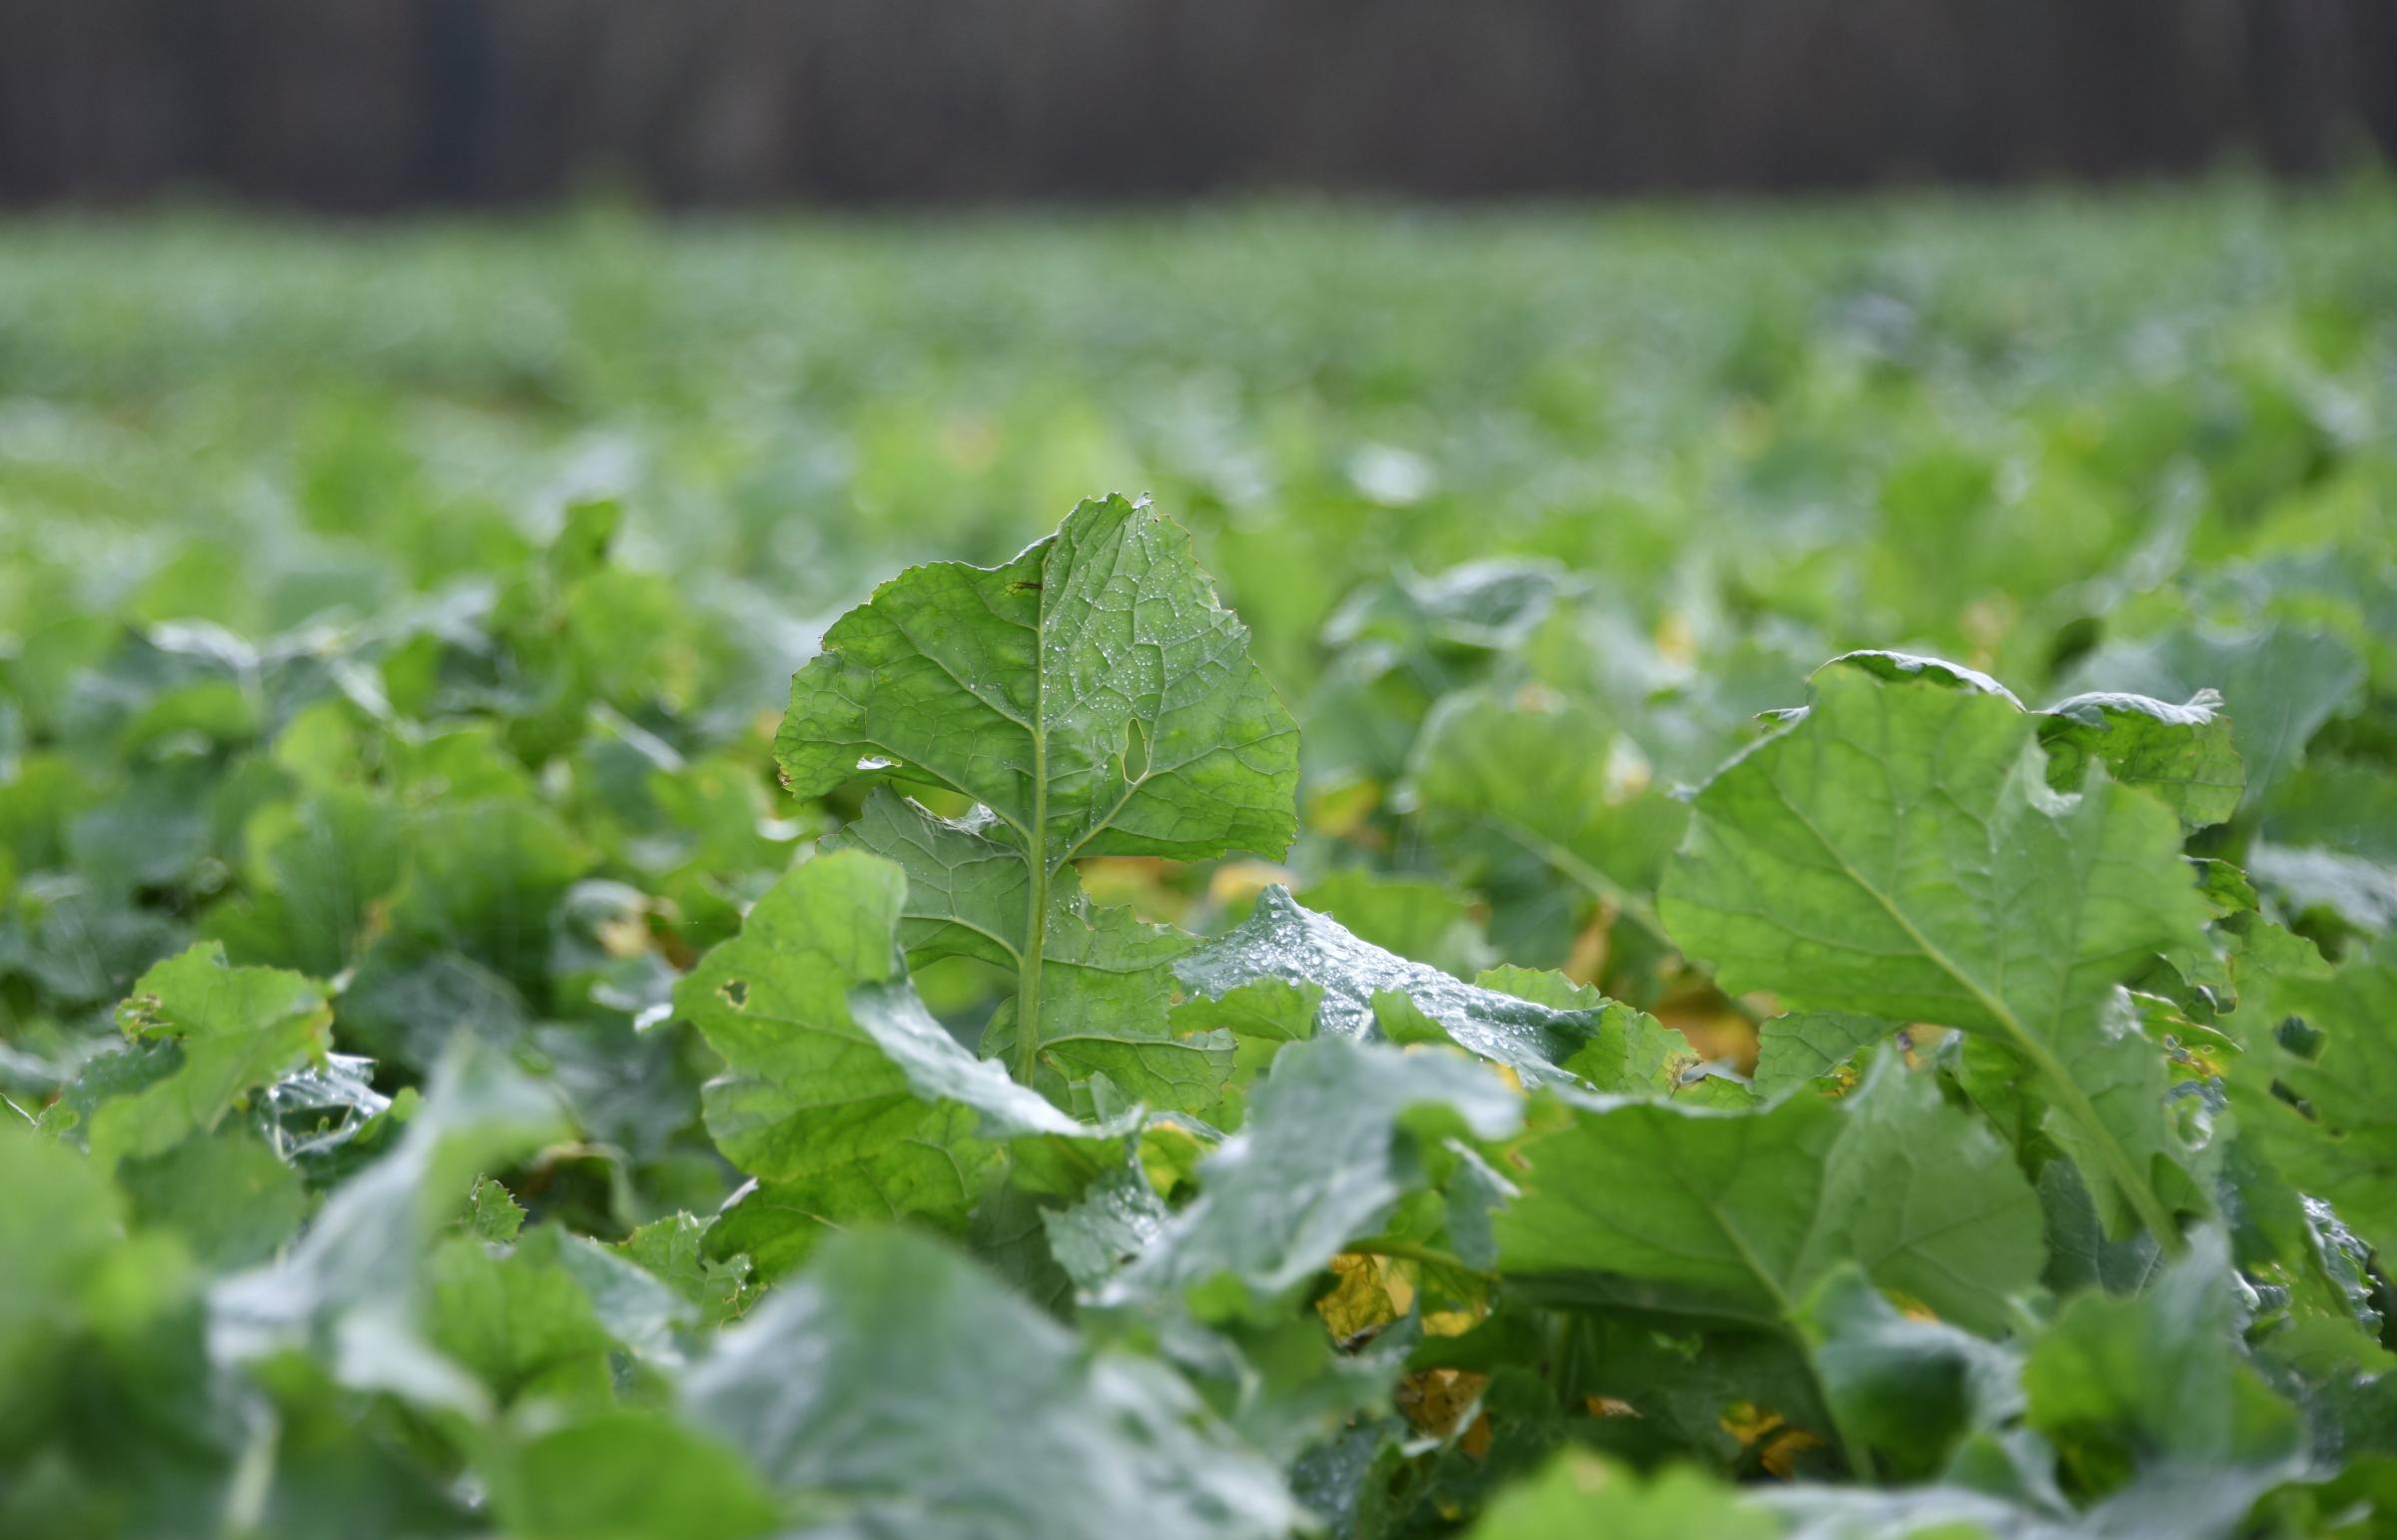 Winter OSR yield results confirm new hybrid as a top performing candidate | The Scottish Farmer